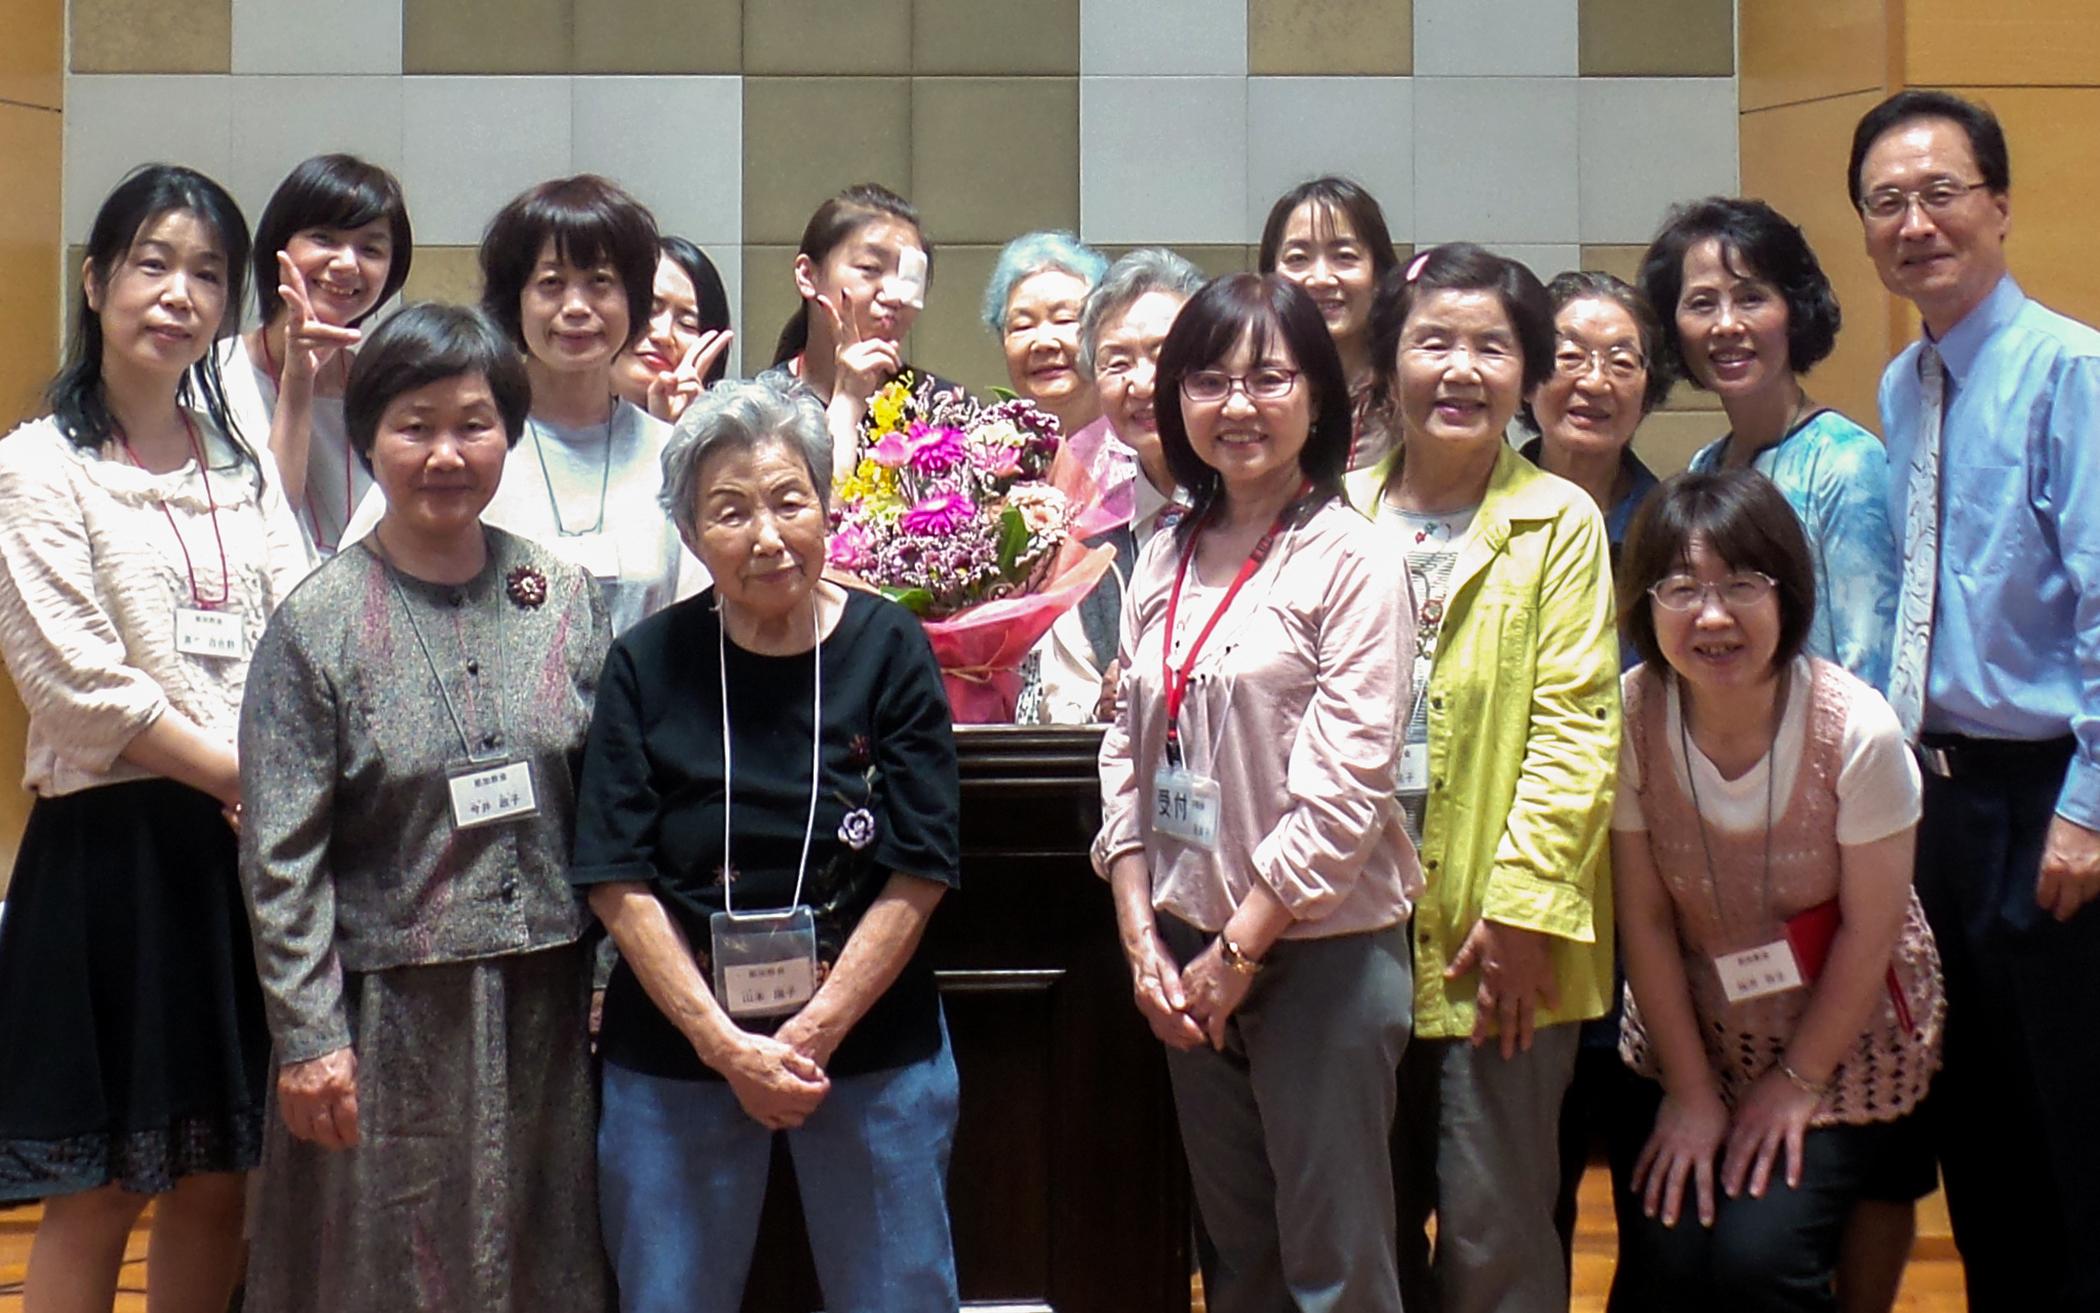 Women in Japan Are Causing Ripples in Christian Leadership Training